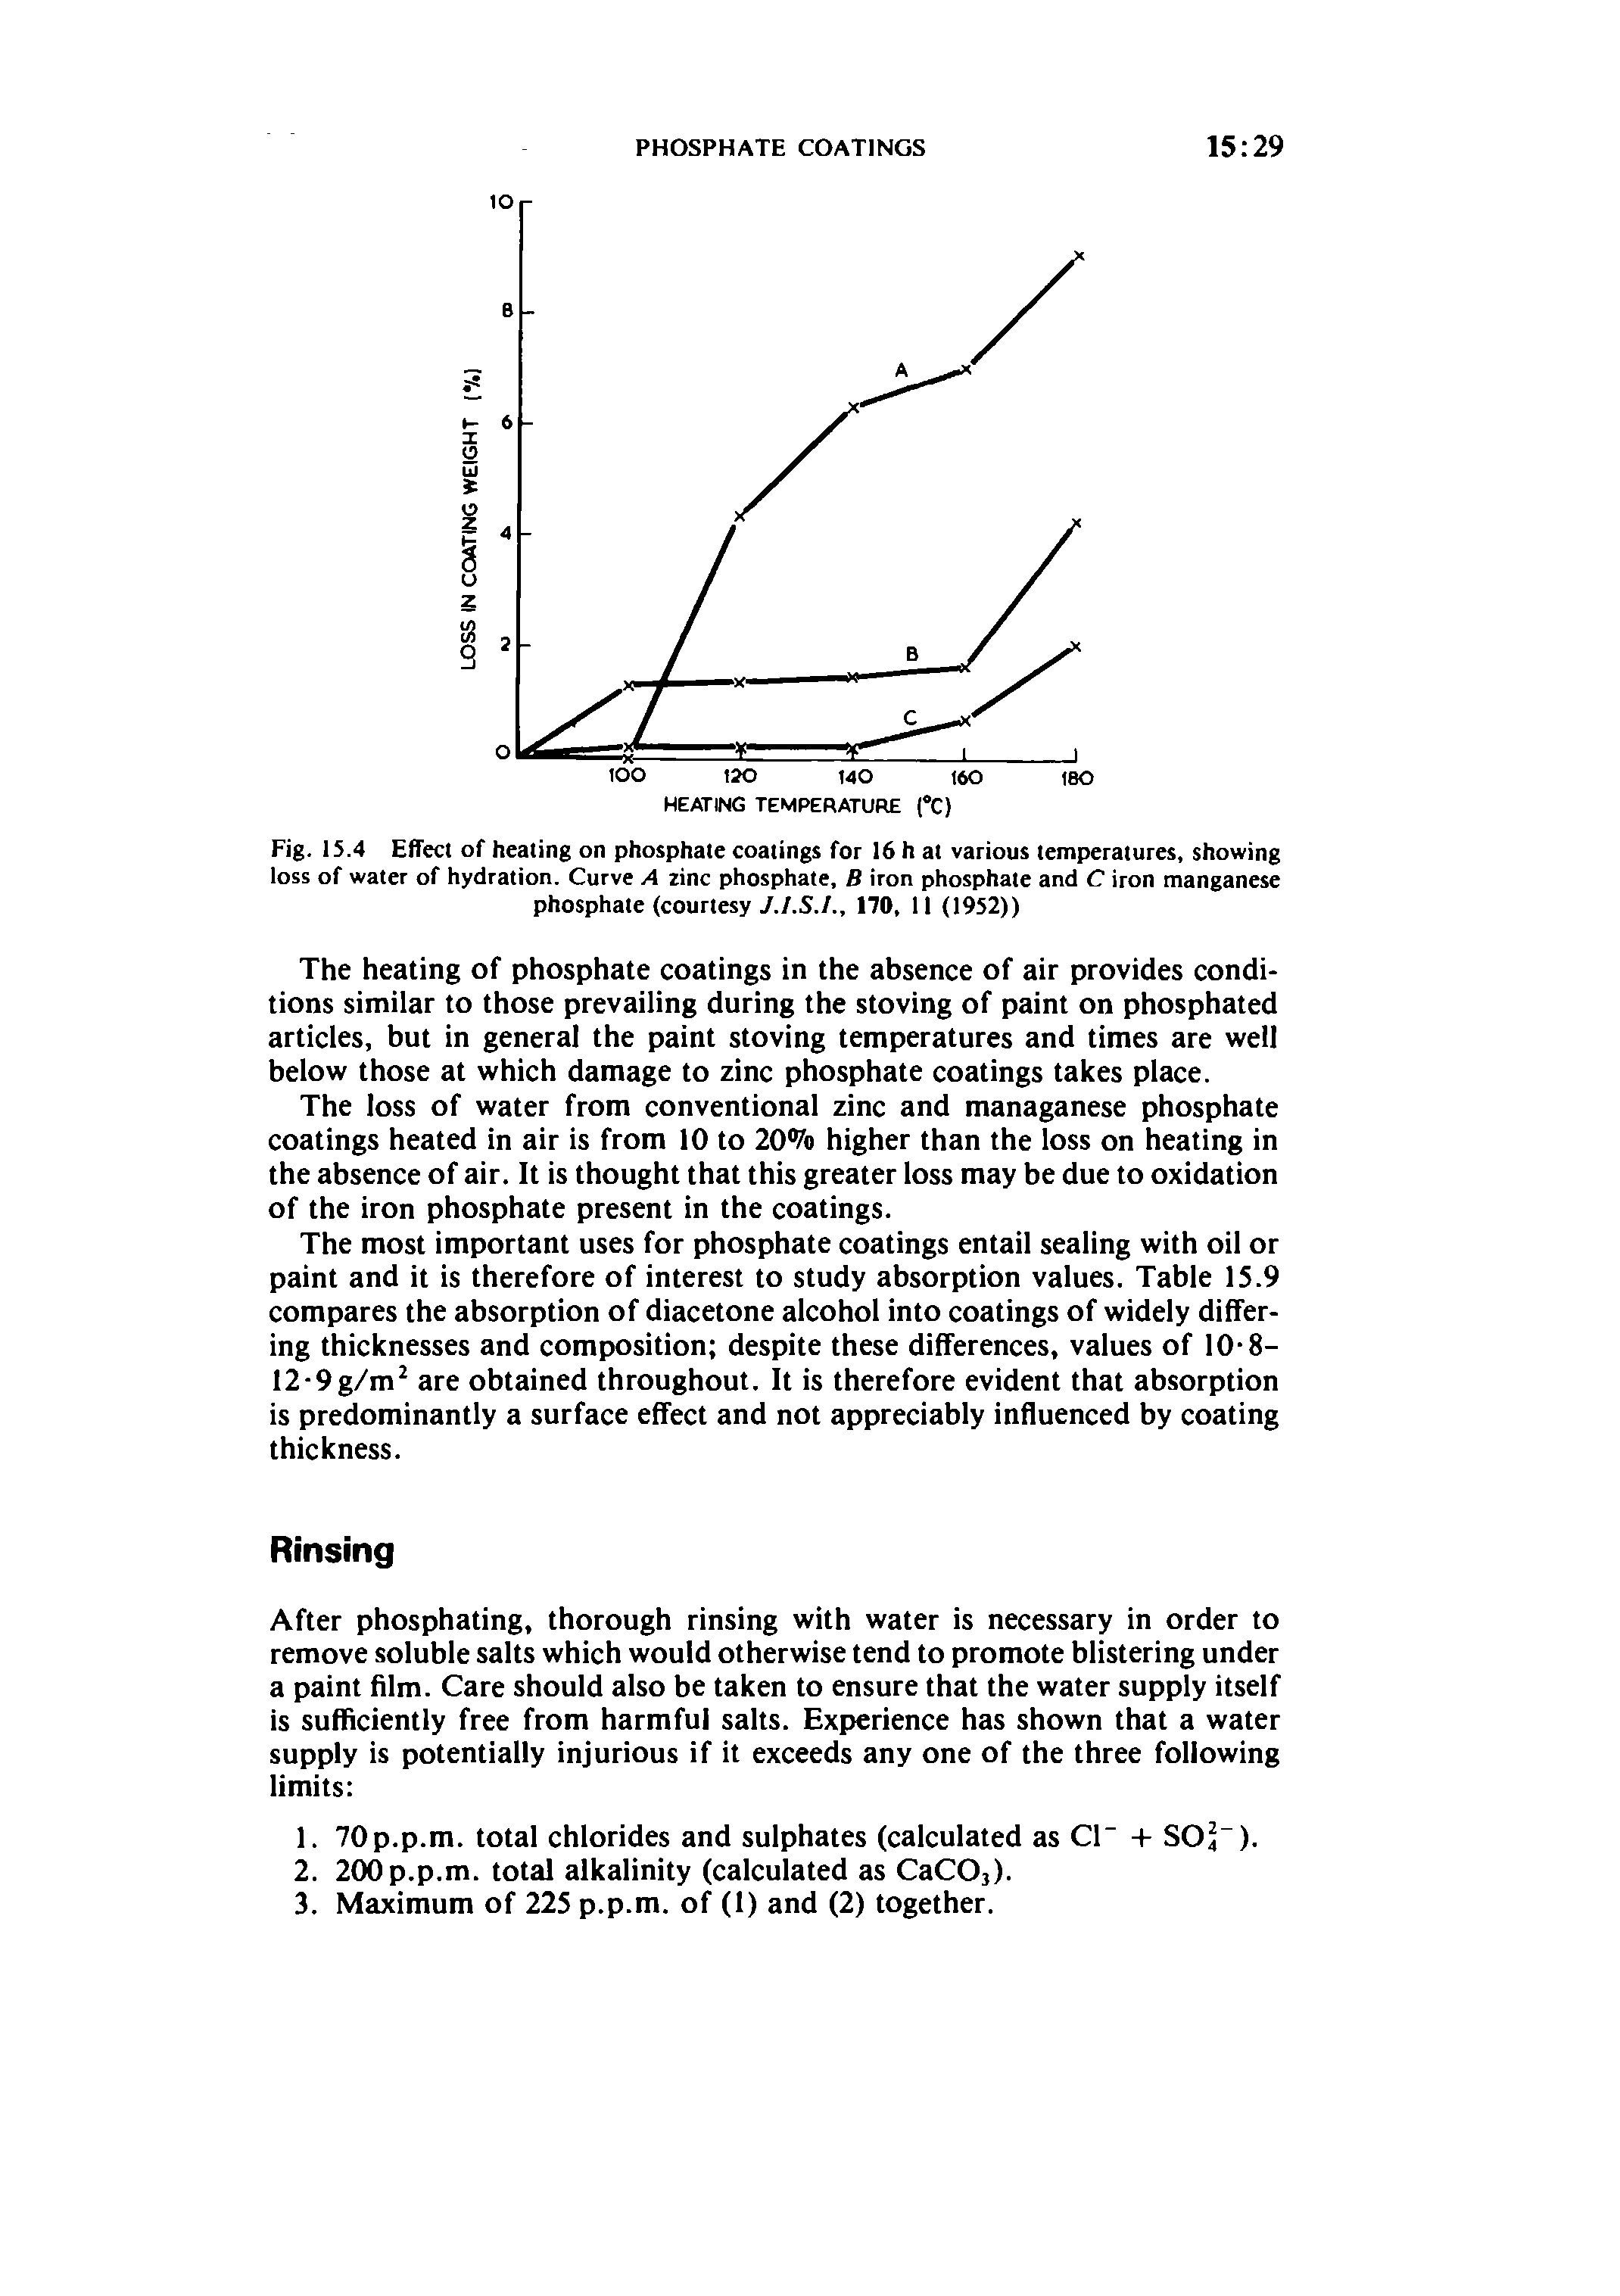 Fig. 15.4 Effecl of heating on phosphate coatings for 16 h at various temperatures, showing loss of water of hydration. Curve A zinc phosphate, B iron phosphate and C iron manganese phosphate (courtesy y./.S./., 170, II (1952))...